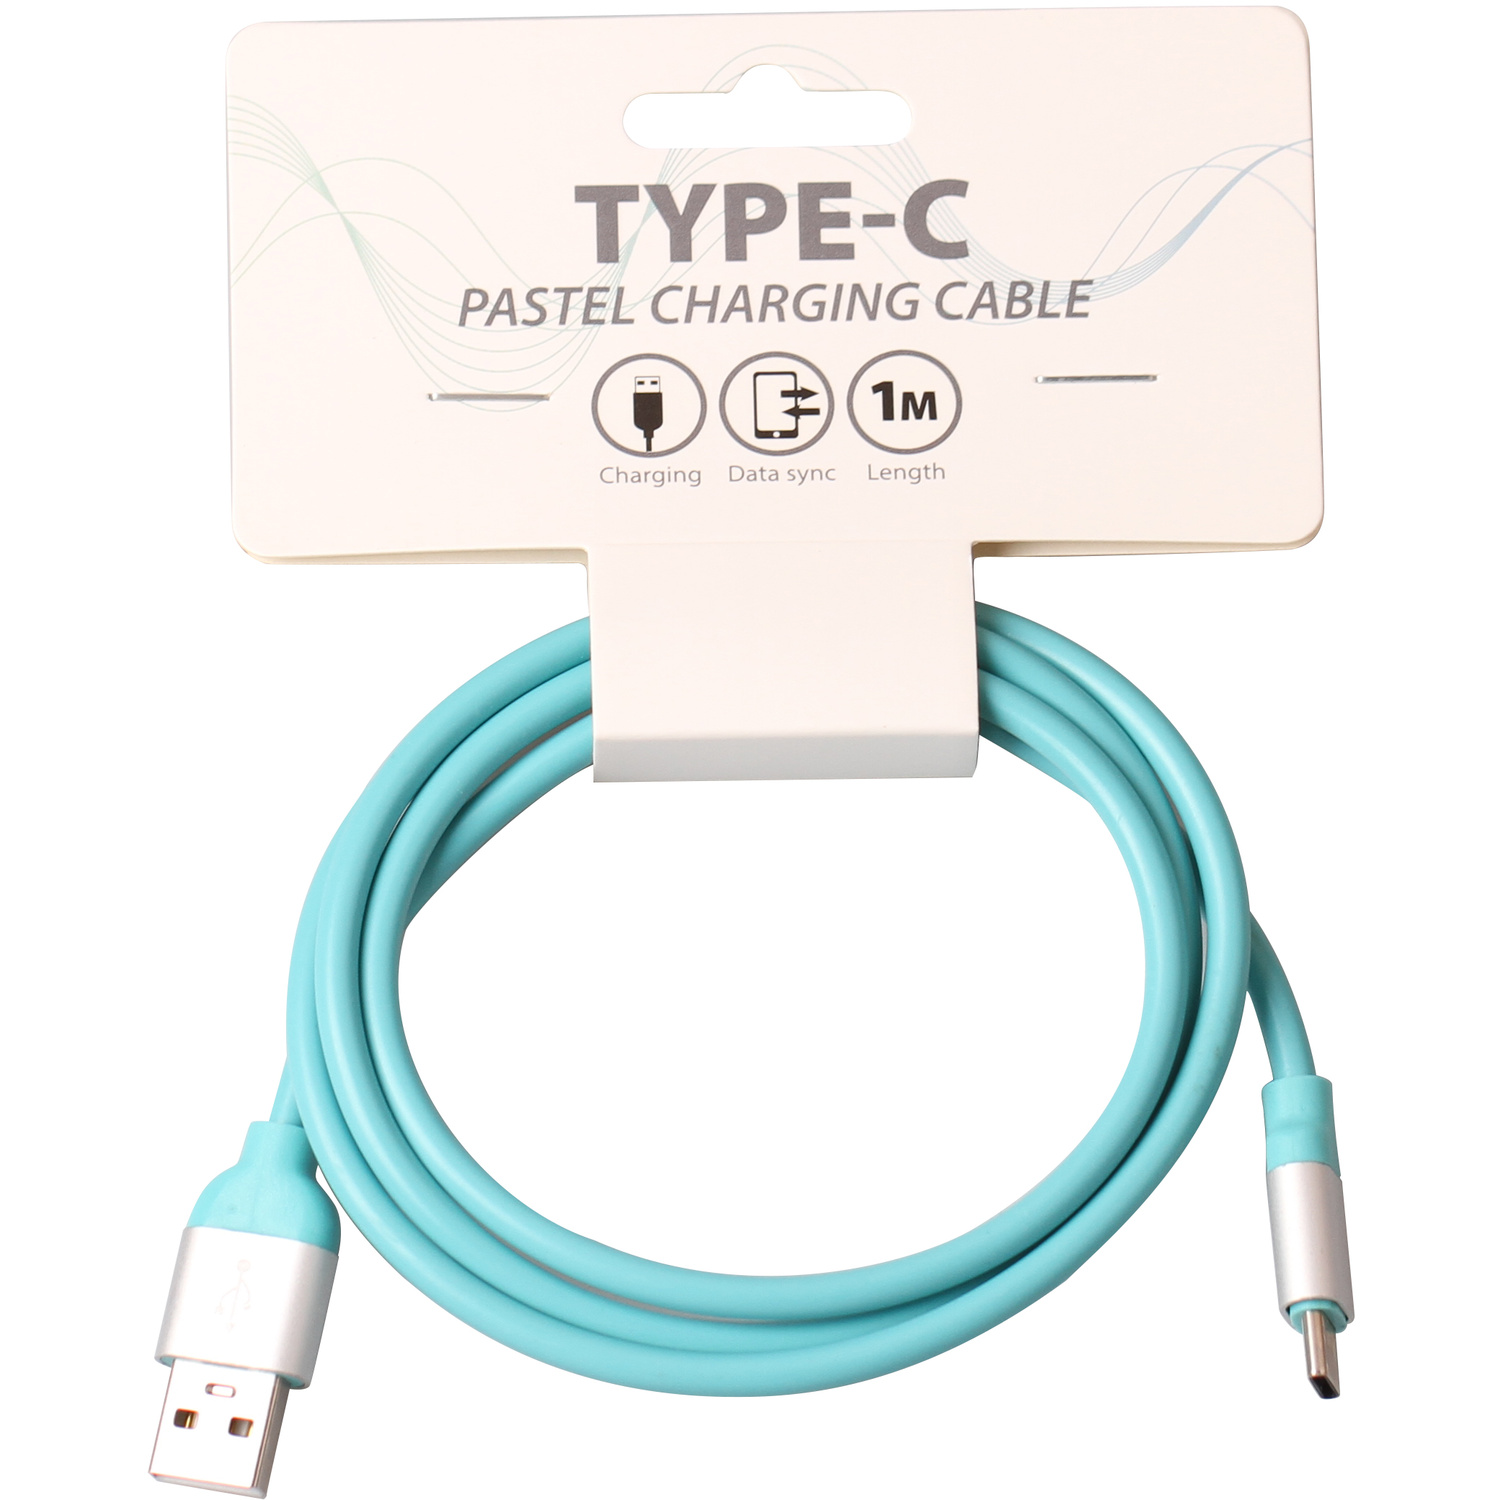 Type-C Pastel Charging Cable Image 1